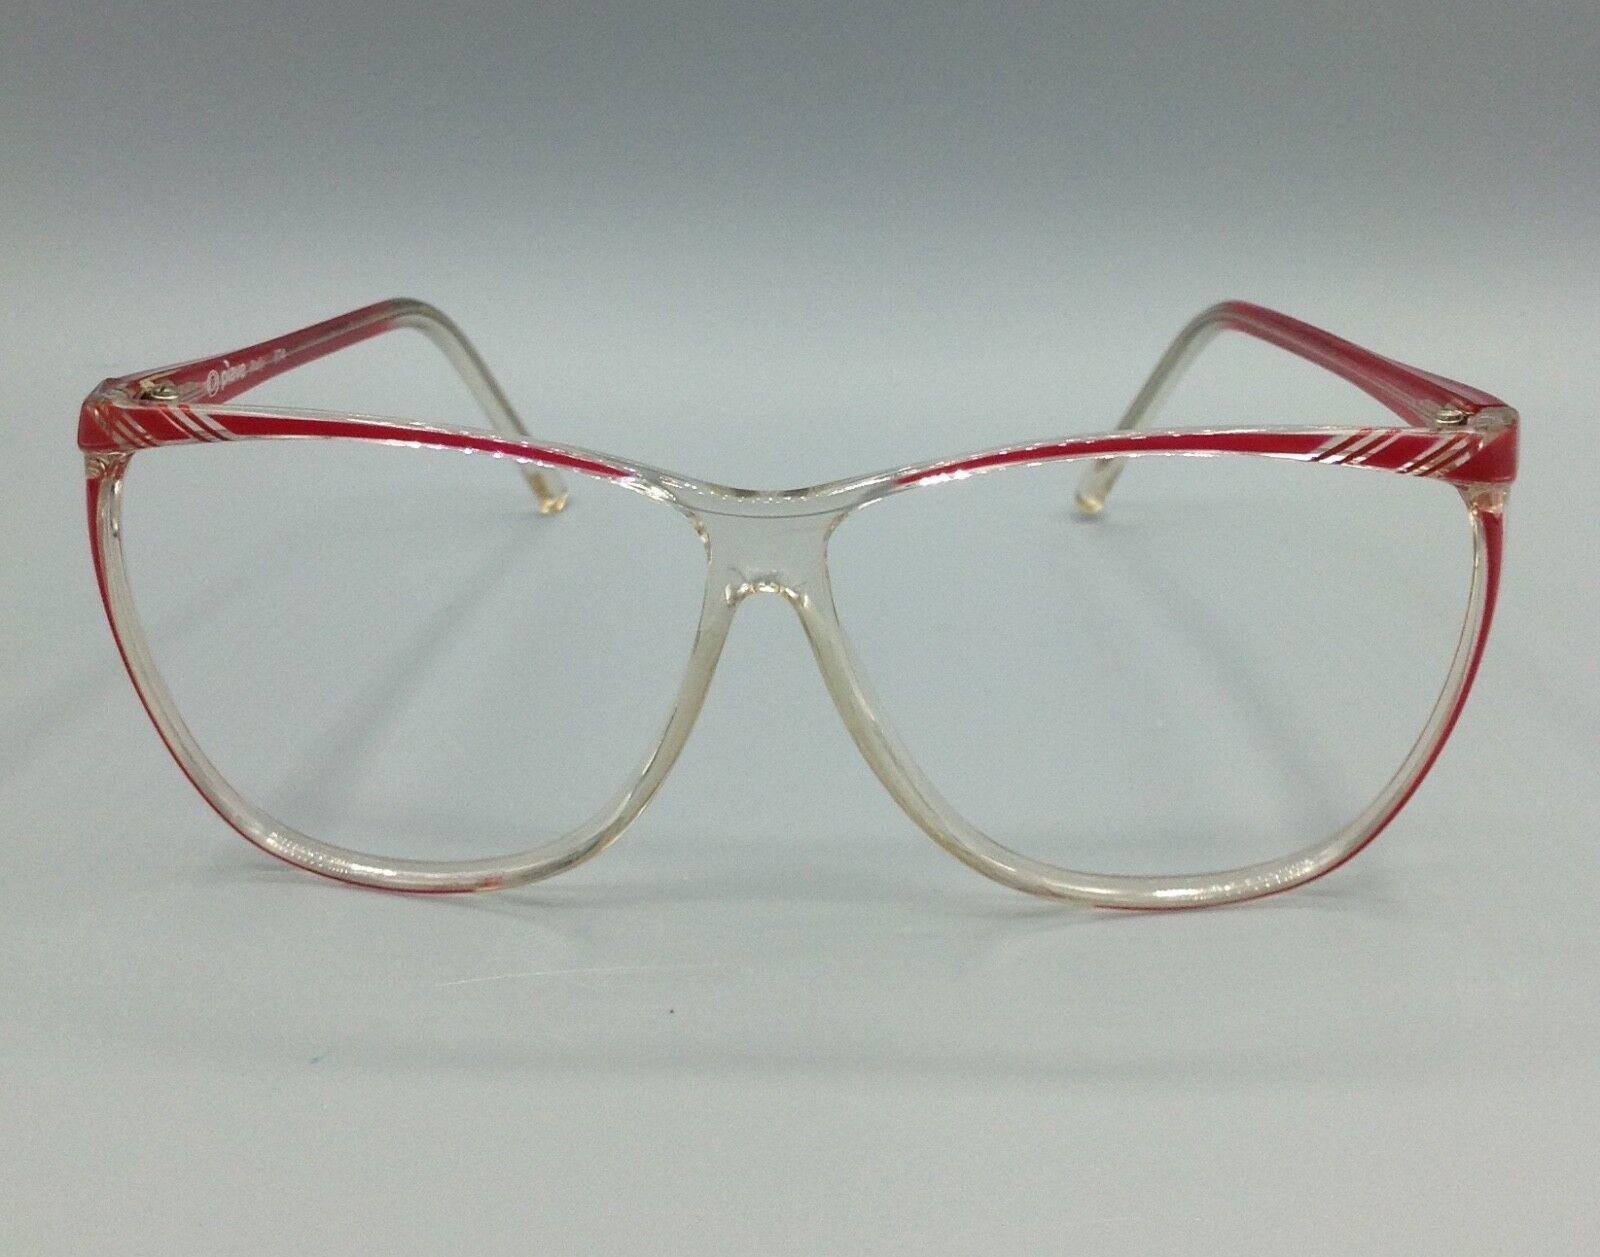 Montatura occhiale vintage Piave made in Italy brillen eyewear frame lunettes